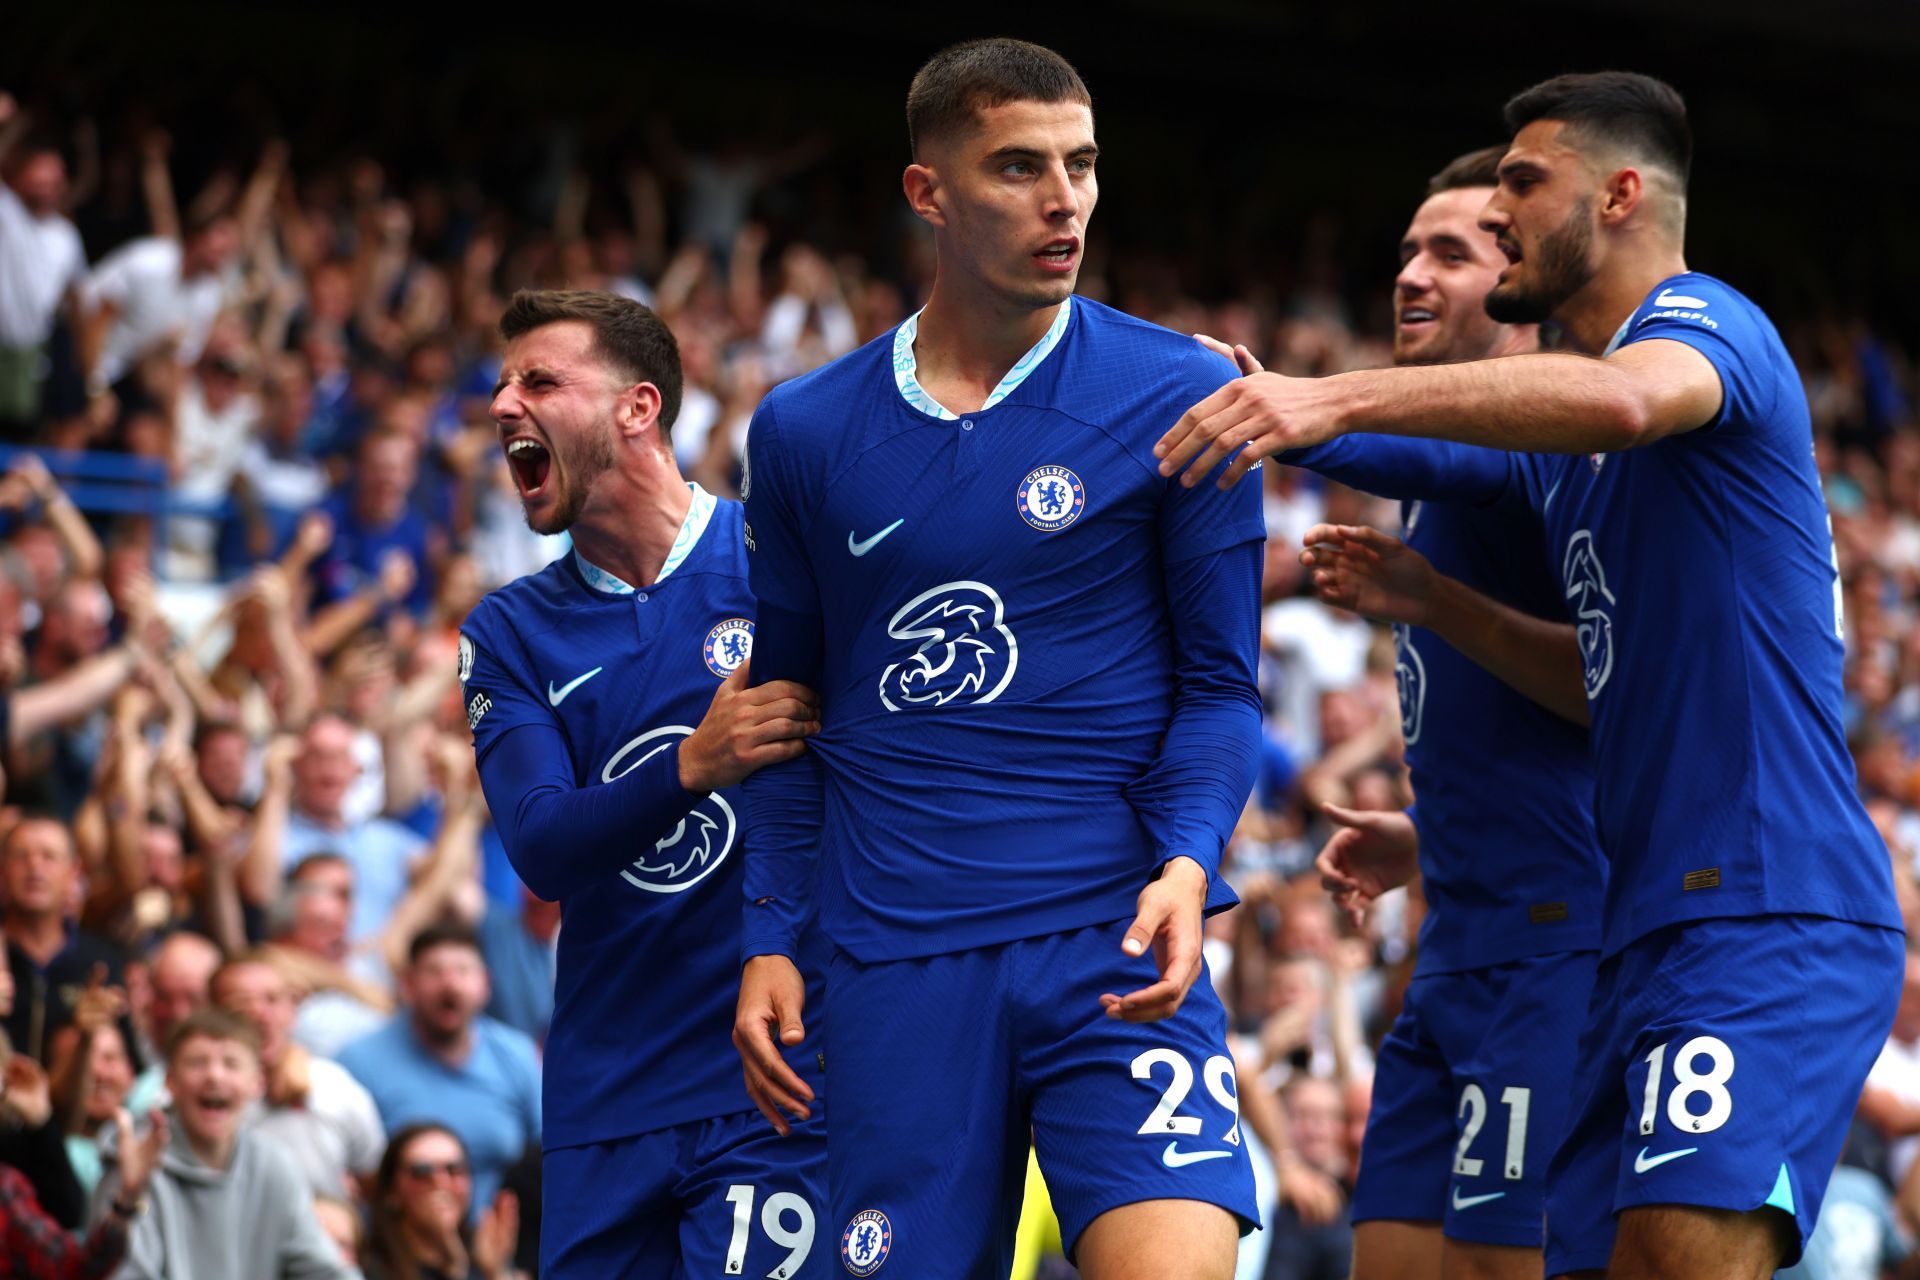 The Blues secured a vital win against the Hammers